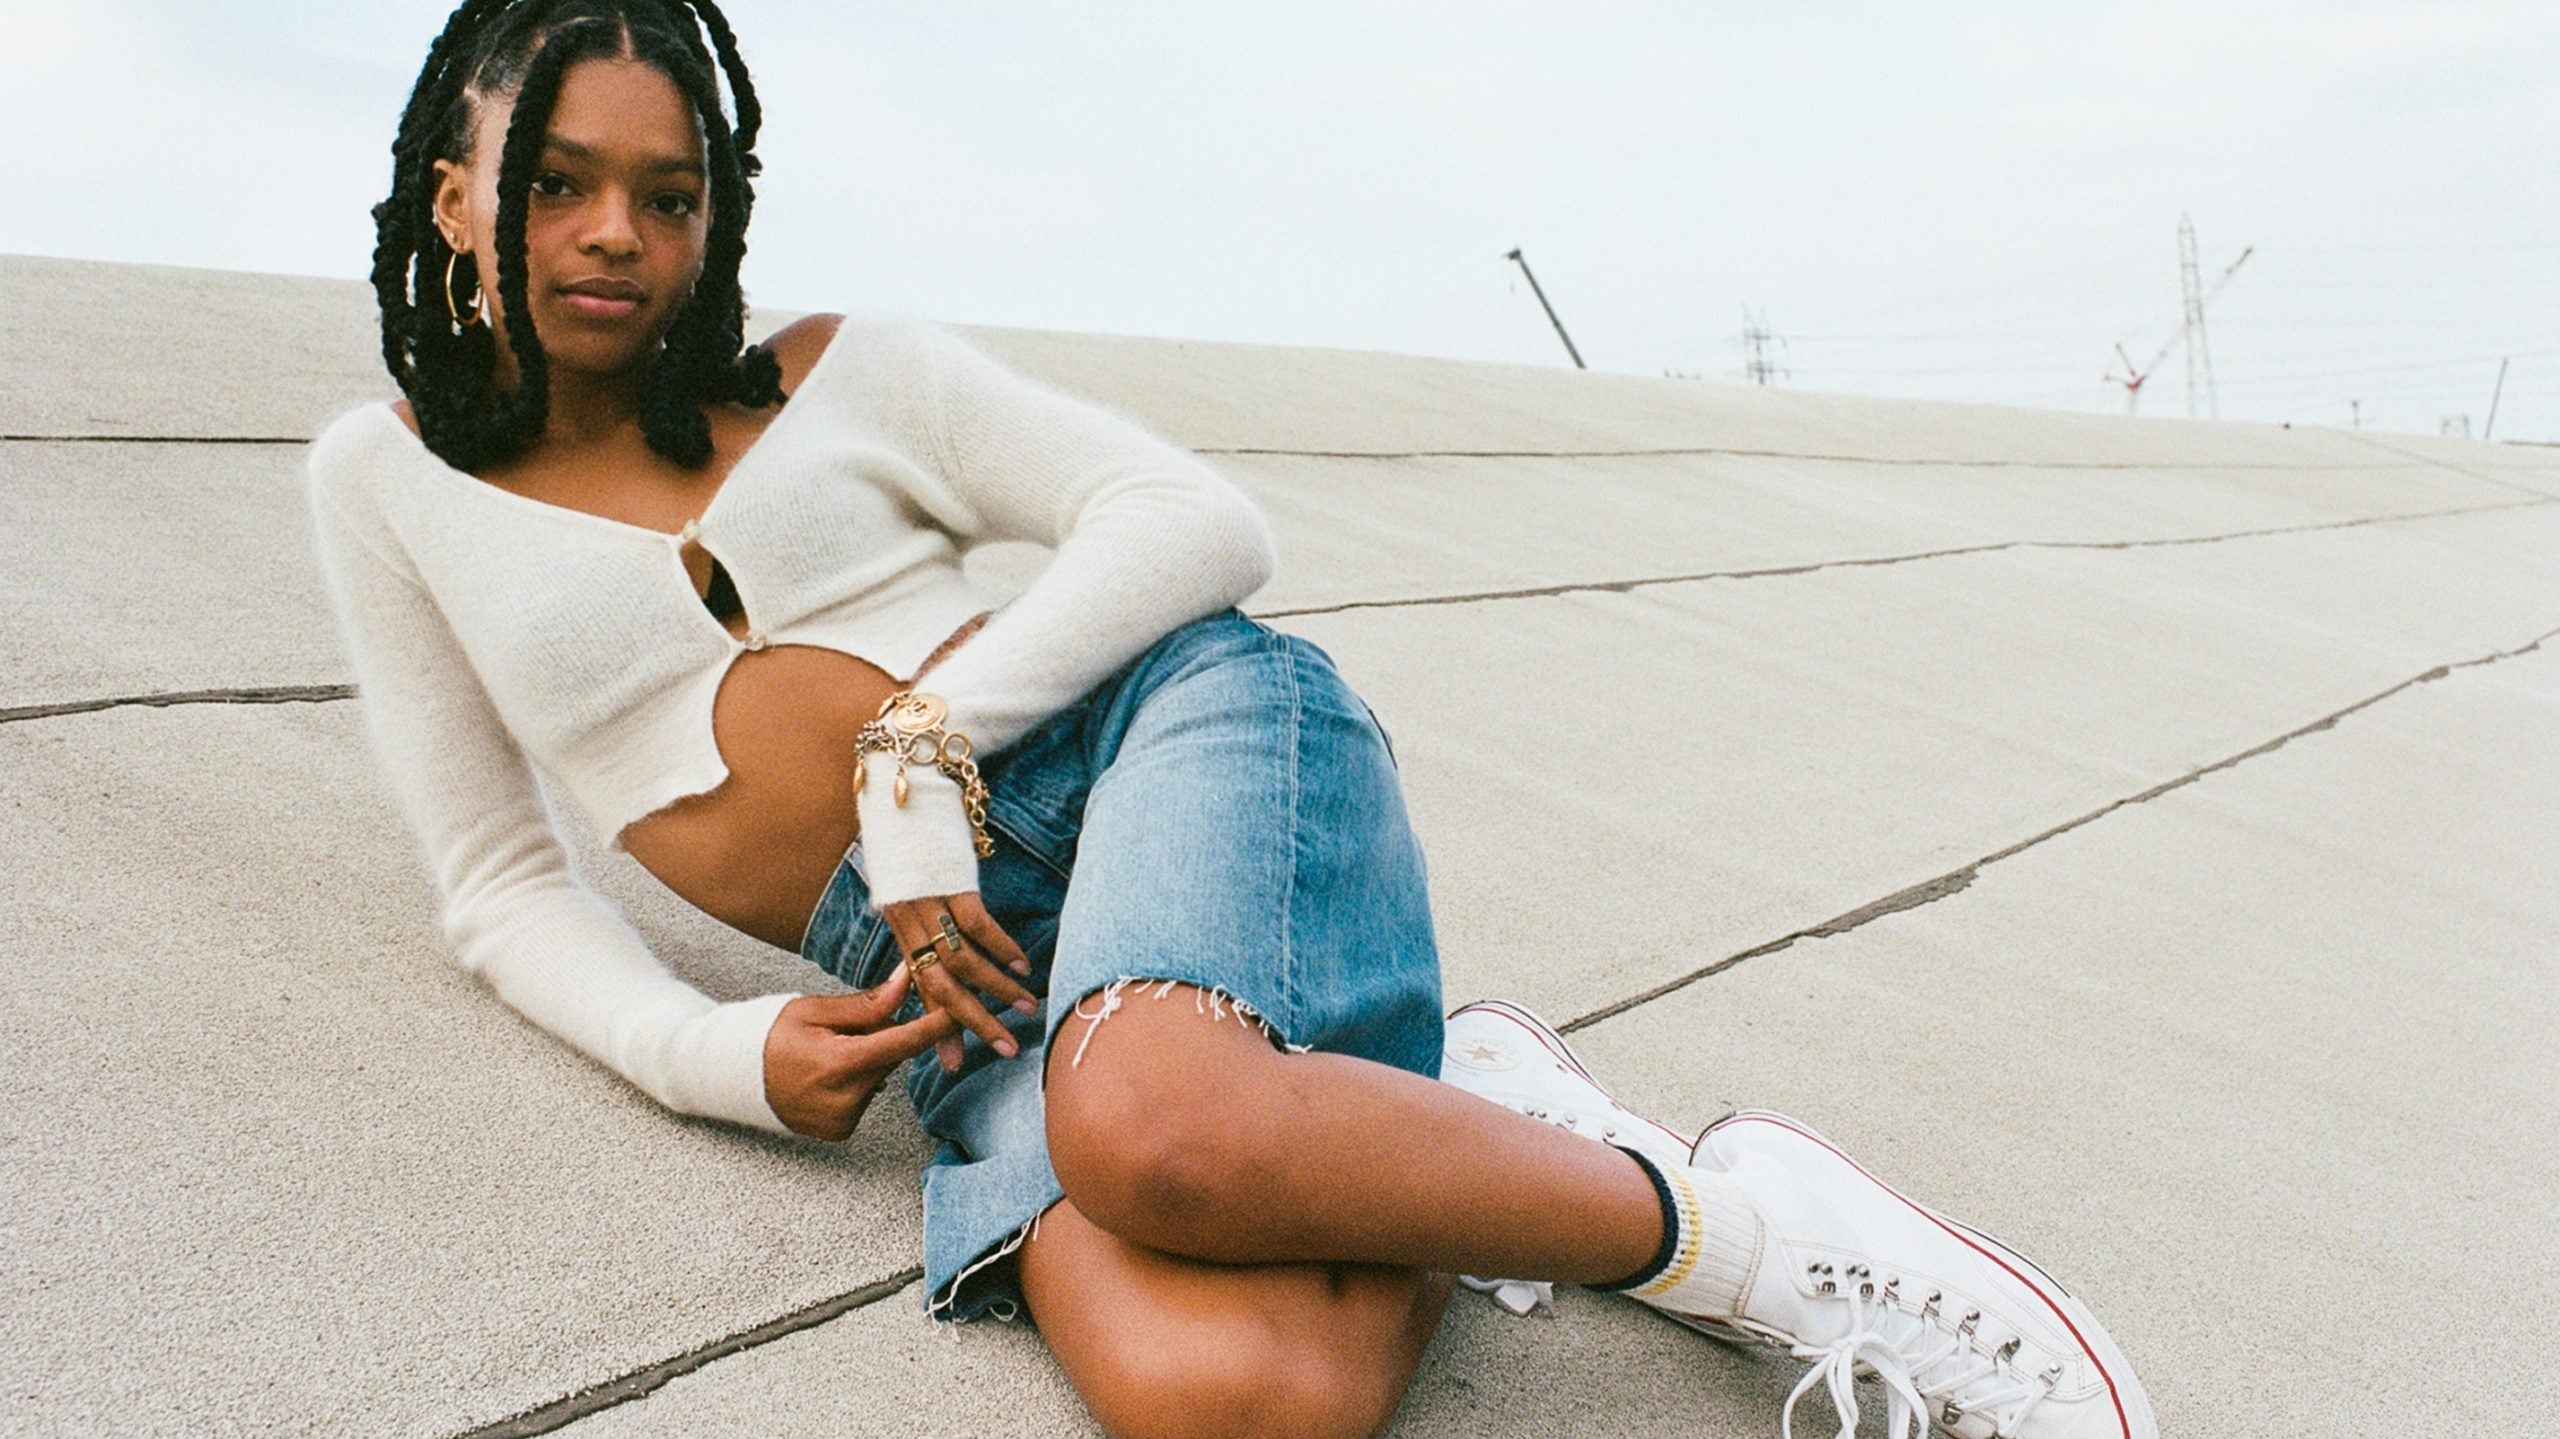 Selah Marley And Tanna Leone Star In pgLang's Converse Collaboration Short Film